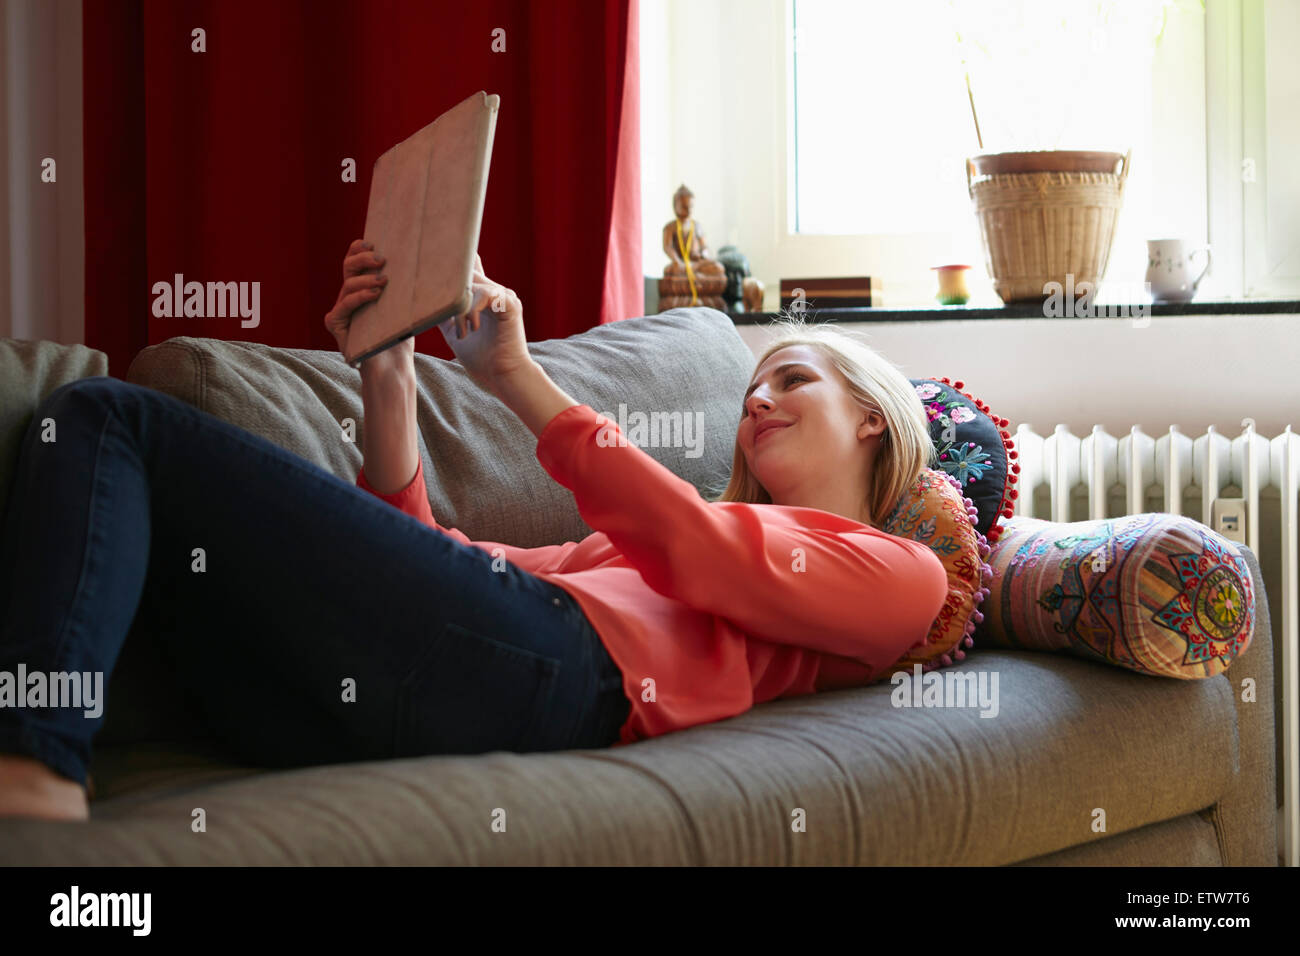 Smiling young woman relaxing with digital tablet on couch at home Stock Photo